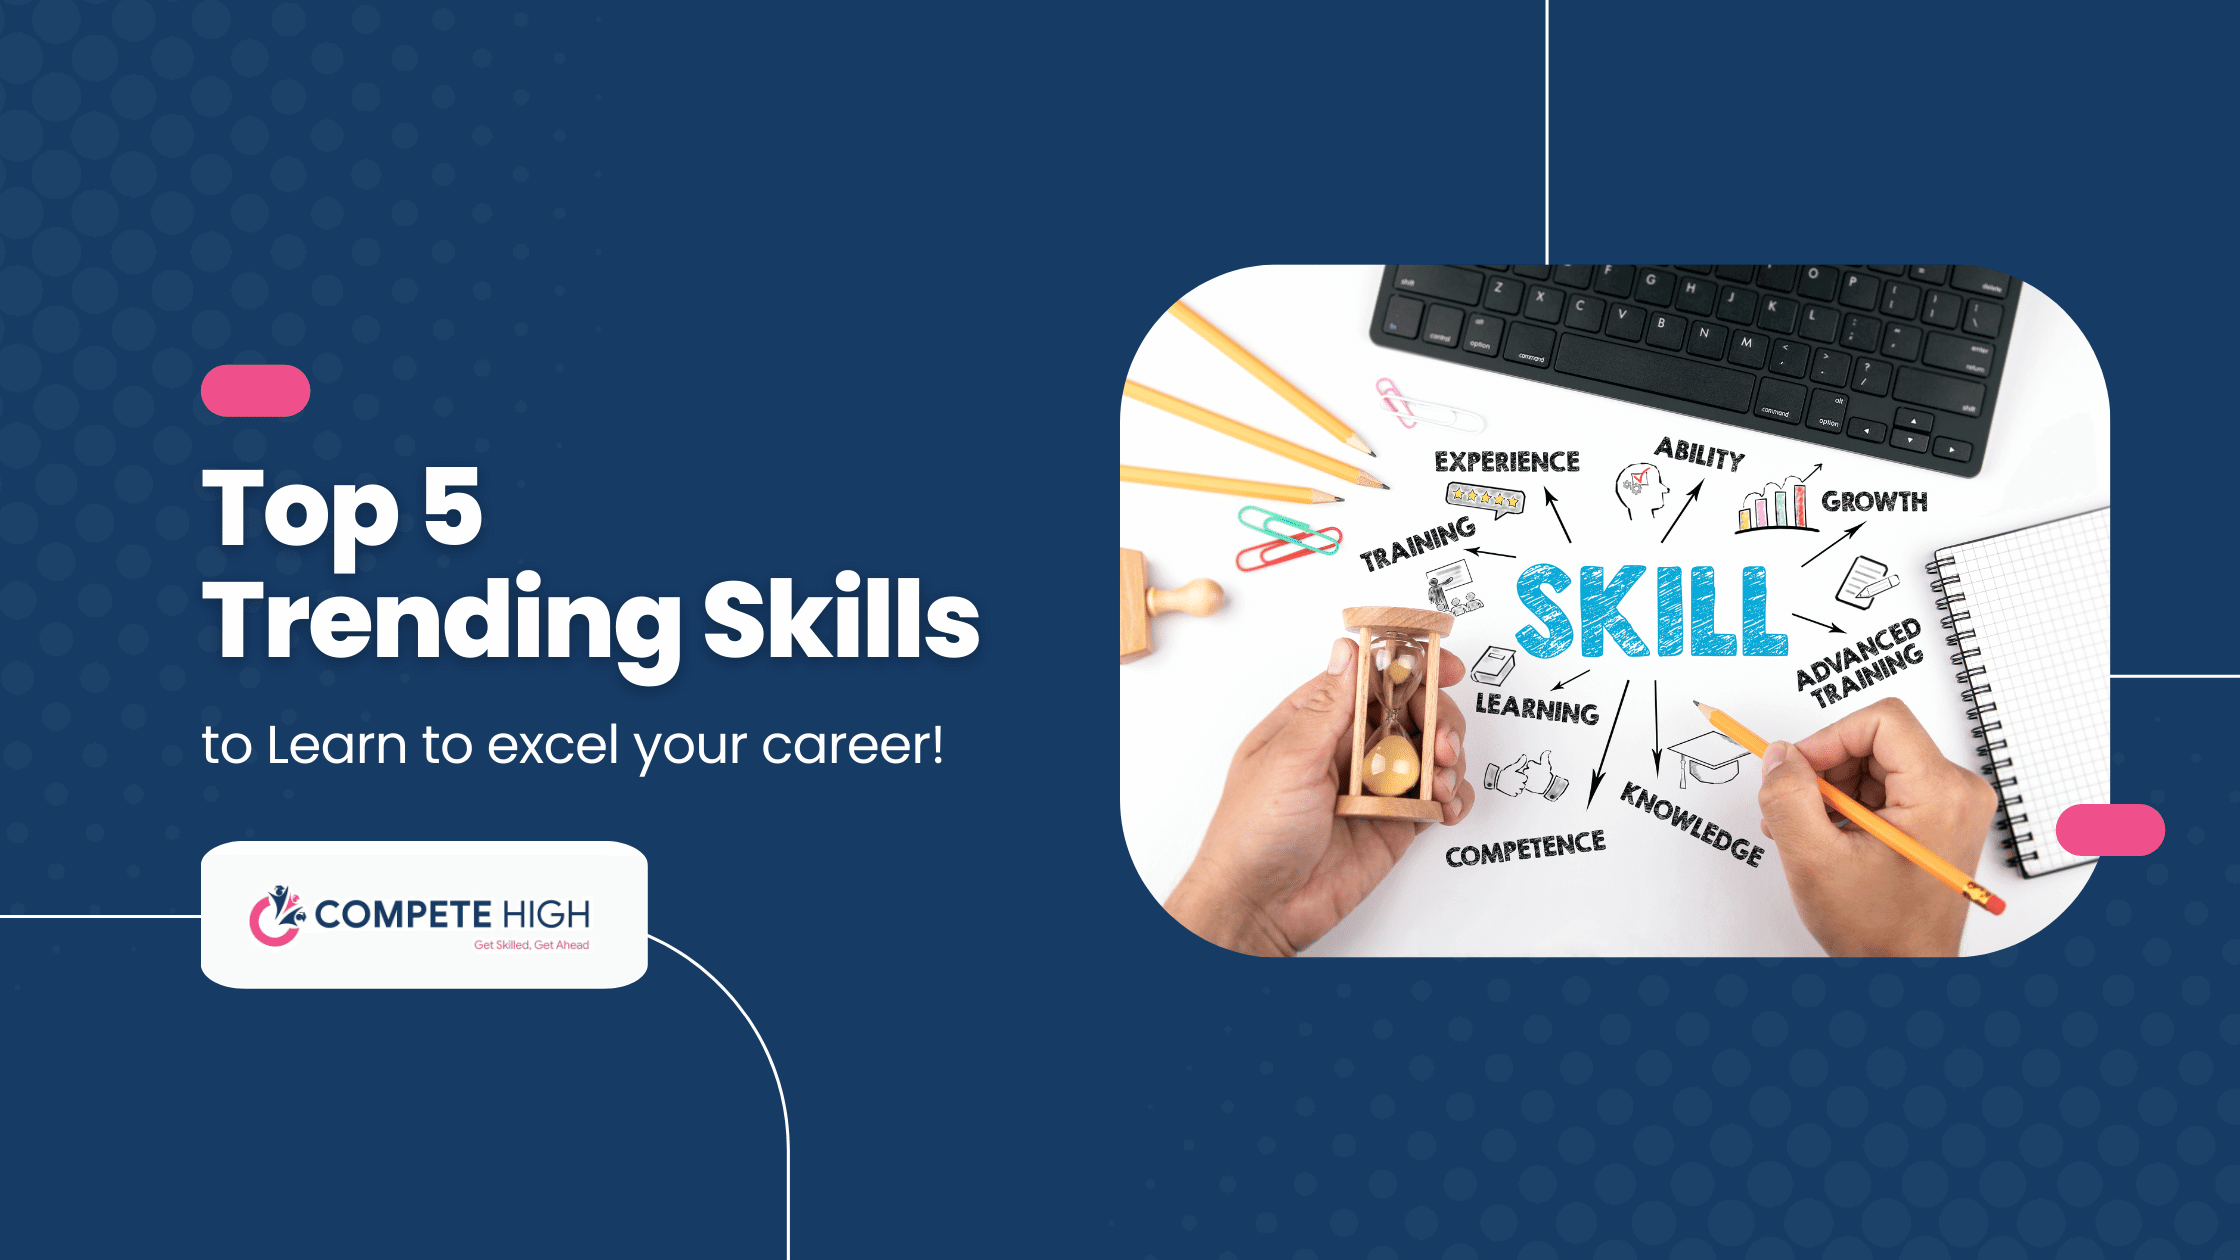 Top 5 trending skills to learn